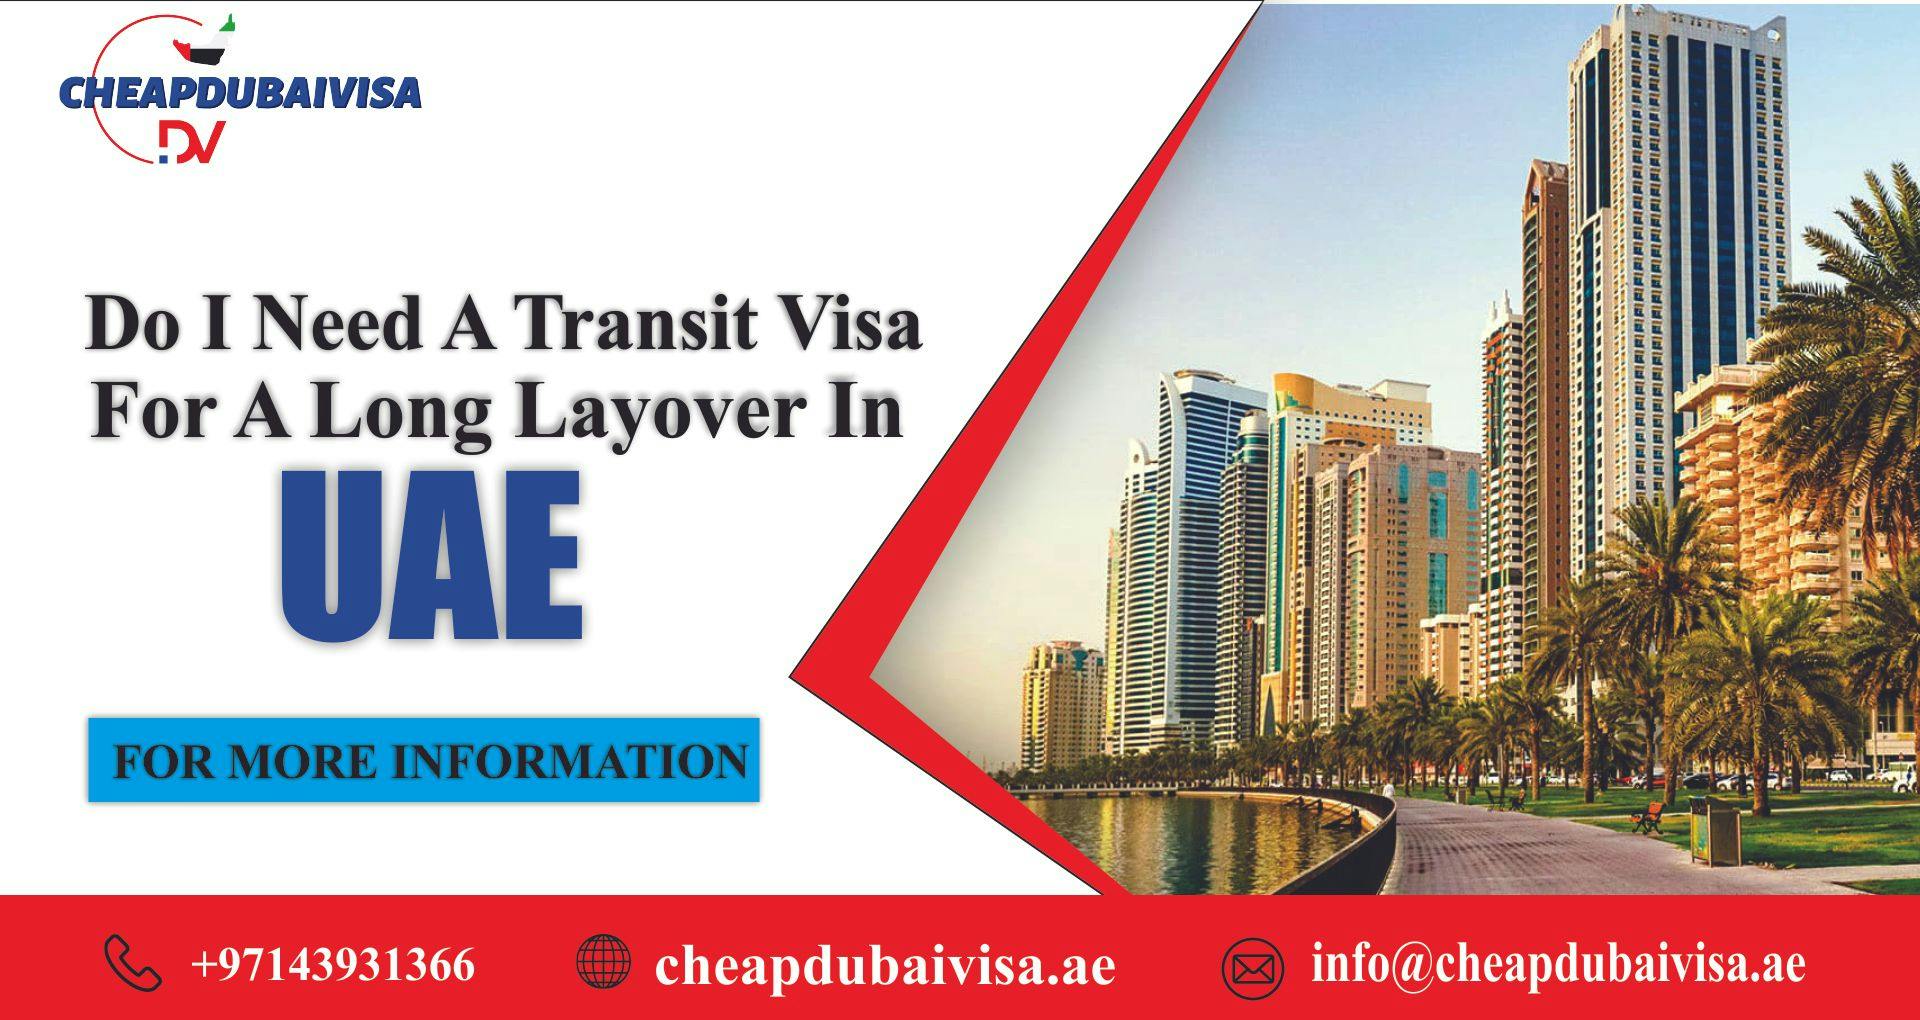 Do I need a Transit Visa for a long layover in uae?